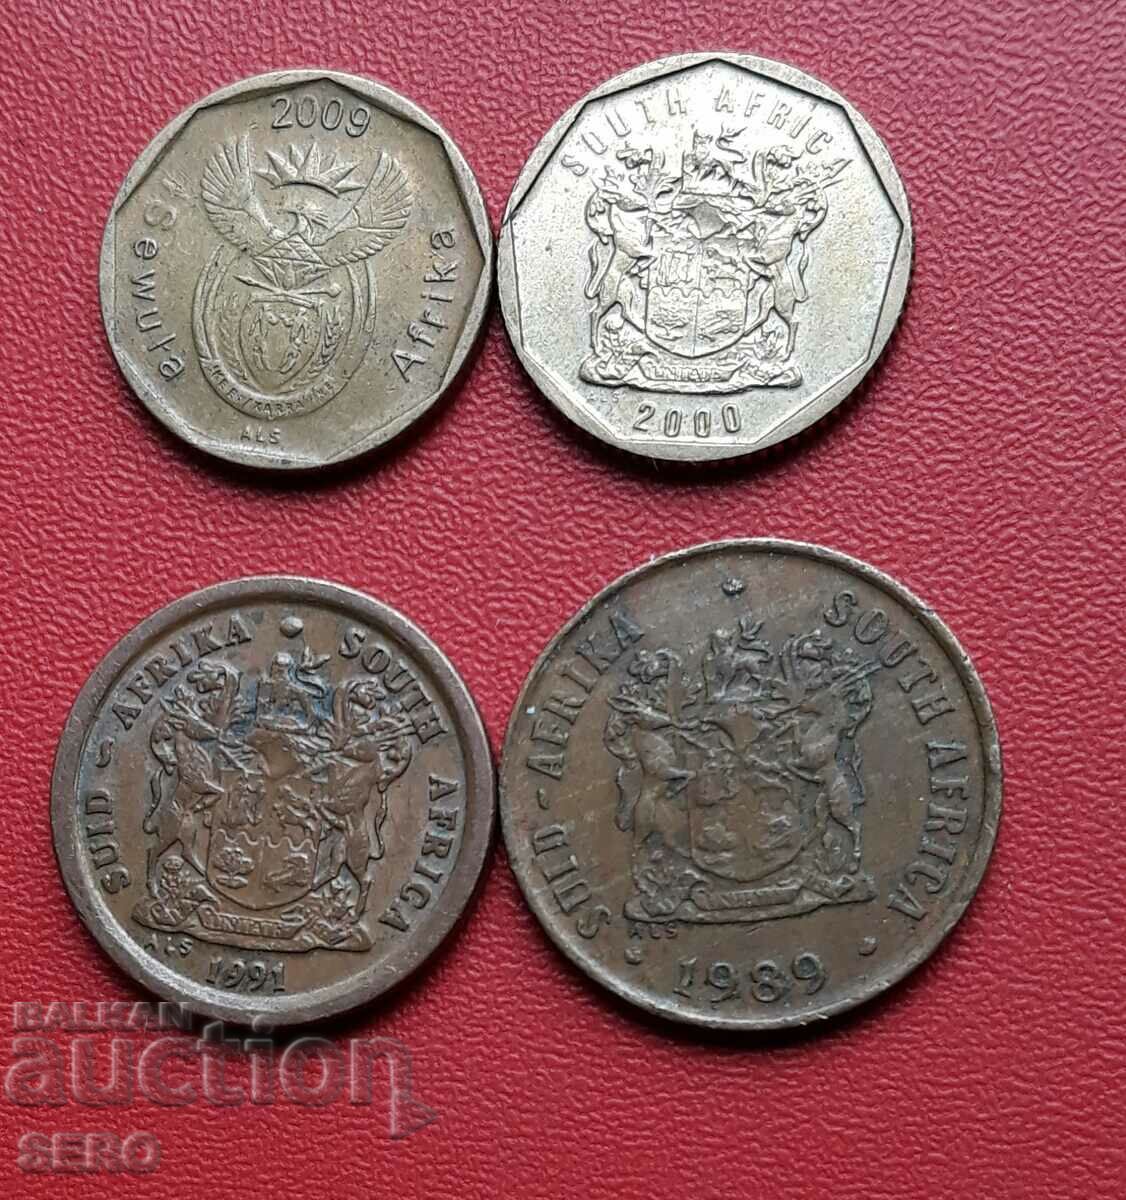 South Africa-lot 4 coins